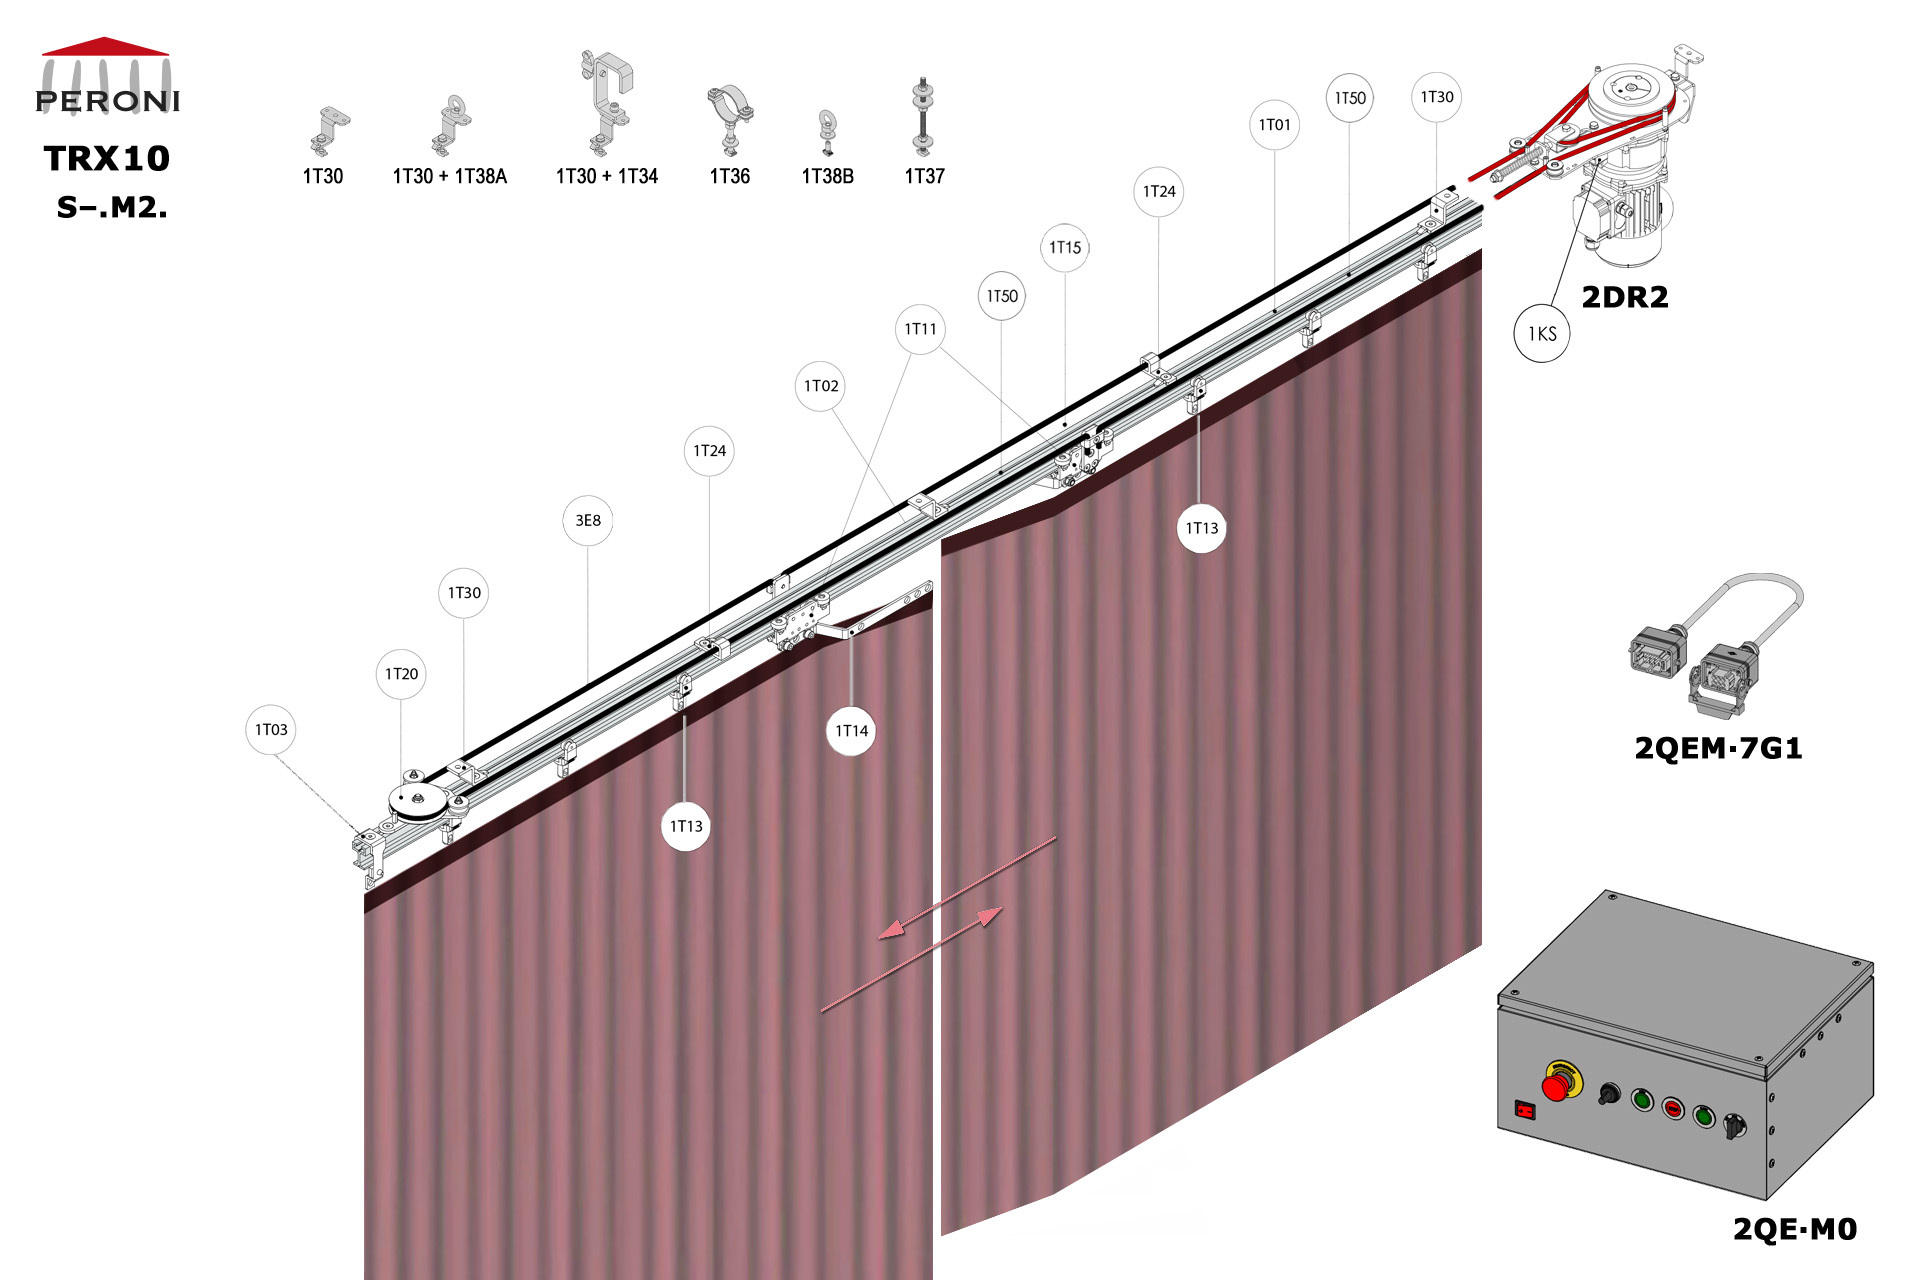 S-.M2. configuration track S-. Straight single rail central openingM2. Motorized, up to 125 kg curtainup to 50 cm central overlapComponents1T01 - Straight rail1T02 - Connection set1T03 - End stop1KS - End stop1T11 - Side cord master carrier1T13 - 2 Wheel runner1T14 - Overlap arms kitMotion control1T20 - Horizontal pulley1T24 - Side cord support1T15 - Limit switch arm for 1T11 + 1T501T50 - Limit switch for 1T11 + 1T152DR2-RDS2QEM-7G1-152QE∙M0 - Panou de comanda M0 3E - Franghie Poly Ø 8 mm